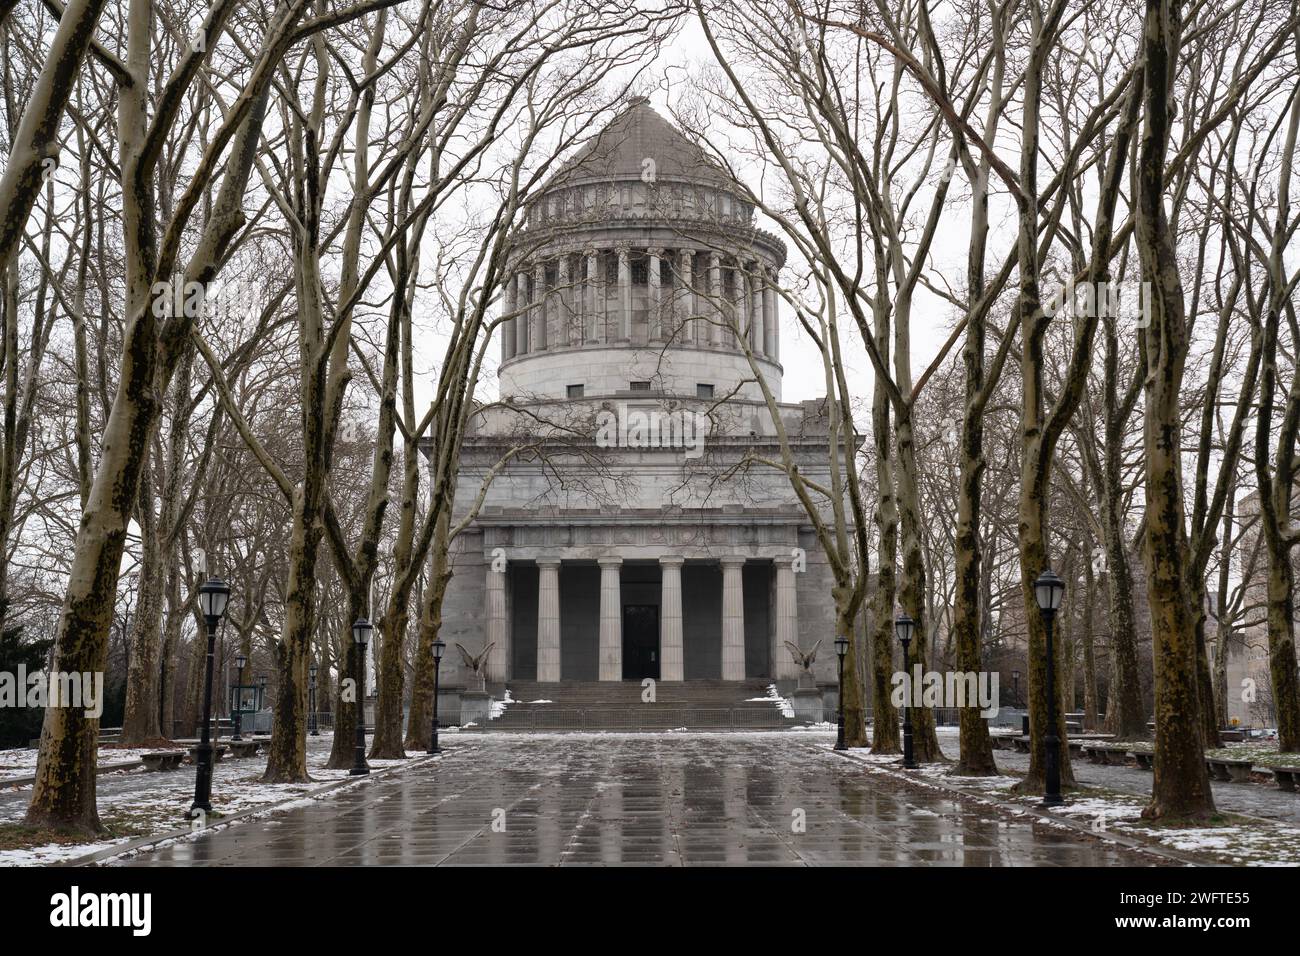 The General Grant National Memorial on the Upper West Side of New York City. Photo date: Tuesday, January 23, 2024. Photo: Richard Gray/Alamy Stock Photo